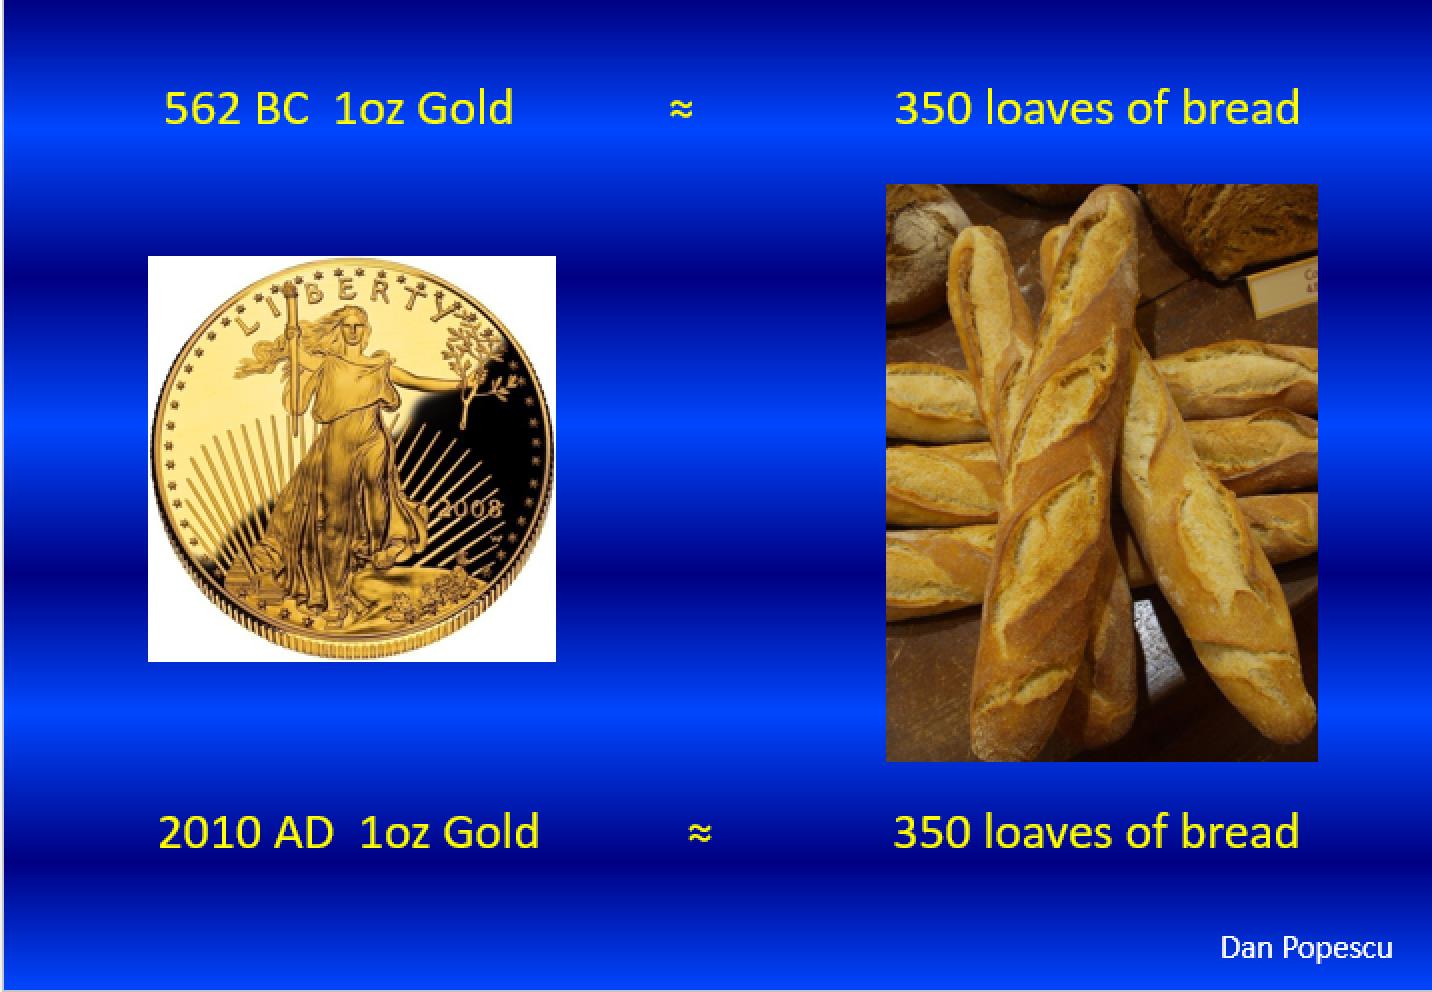 1oz gold, 350 loaves of bread